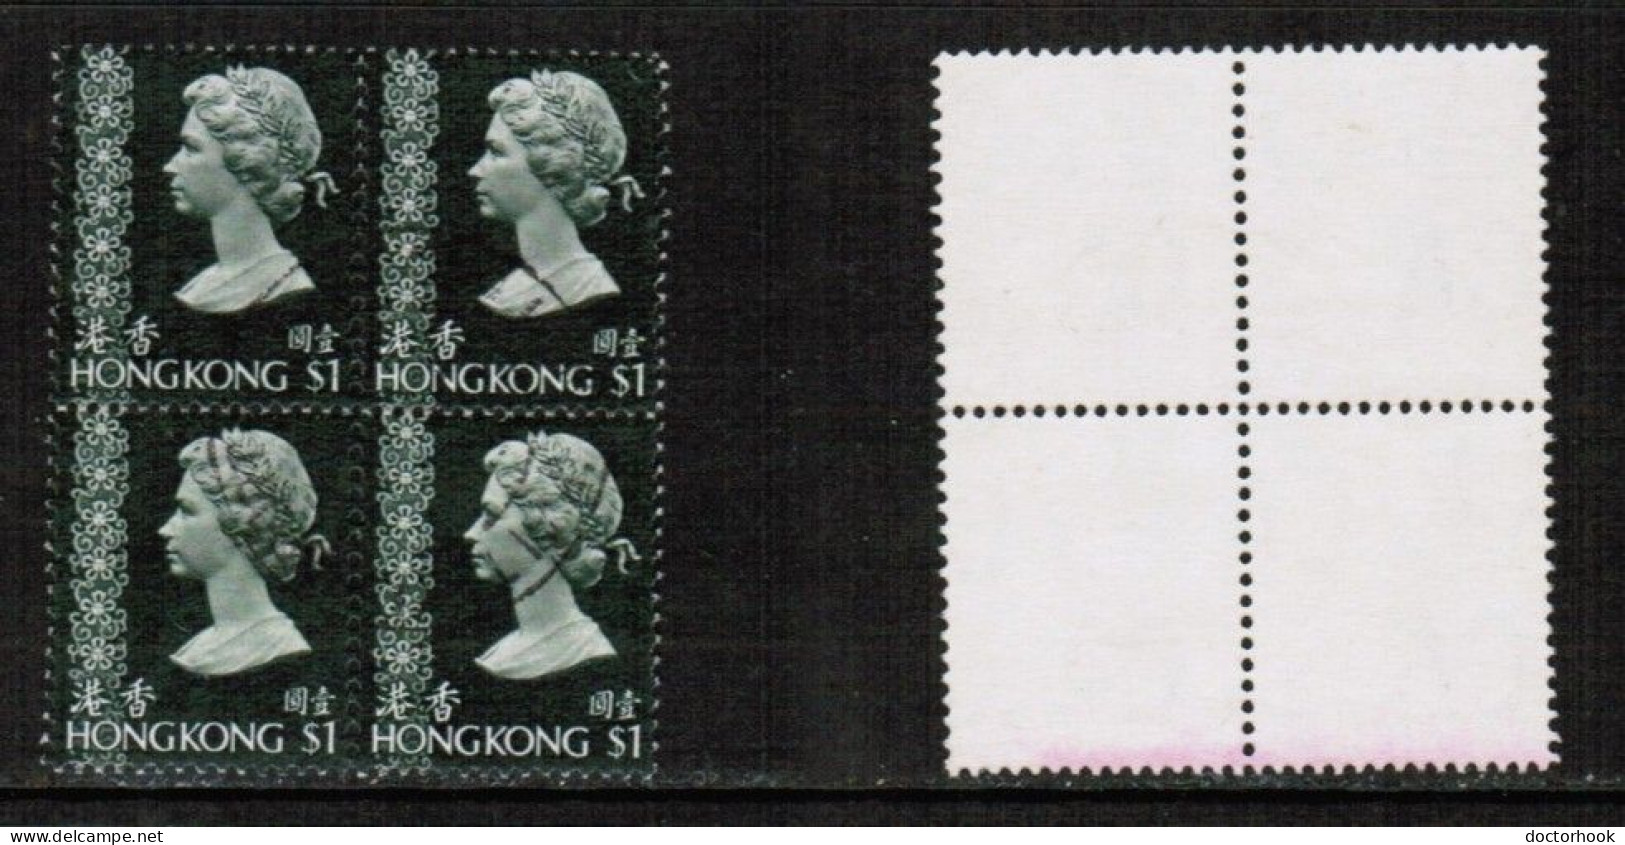 HONG KONG   Scott # 283 USED BLOCK Of 4 (CONDITION AS PER SCAN) (Stamp Scan # 931-2) - Oblitérés